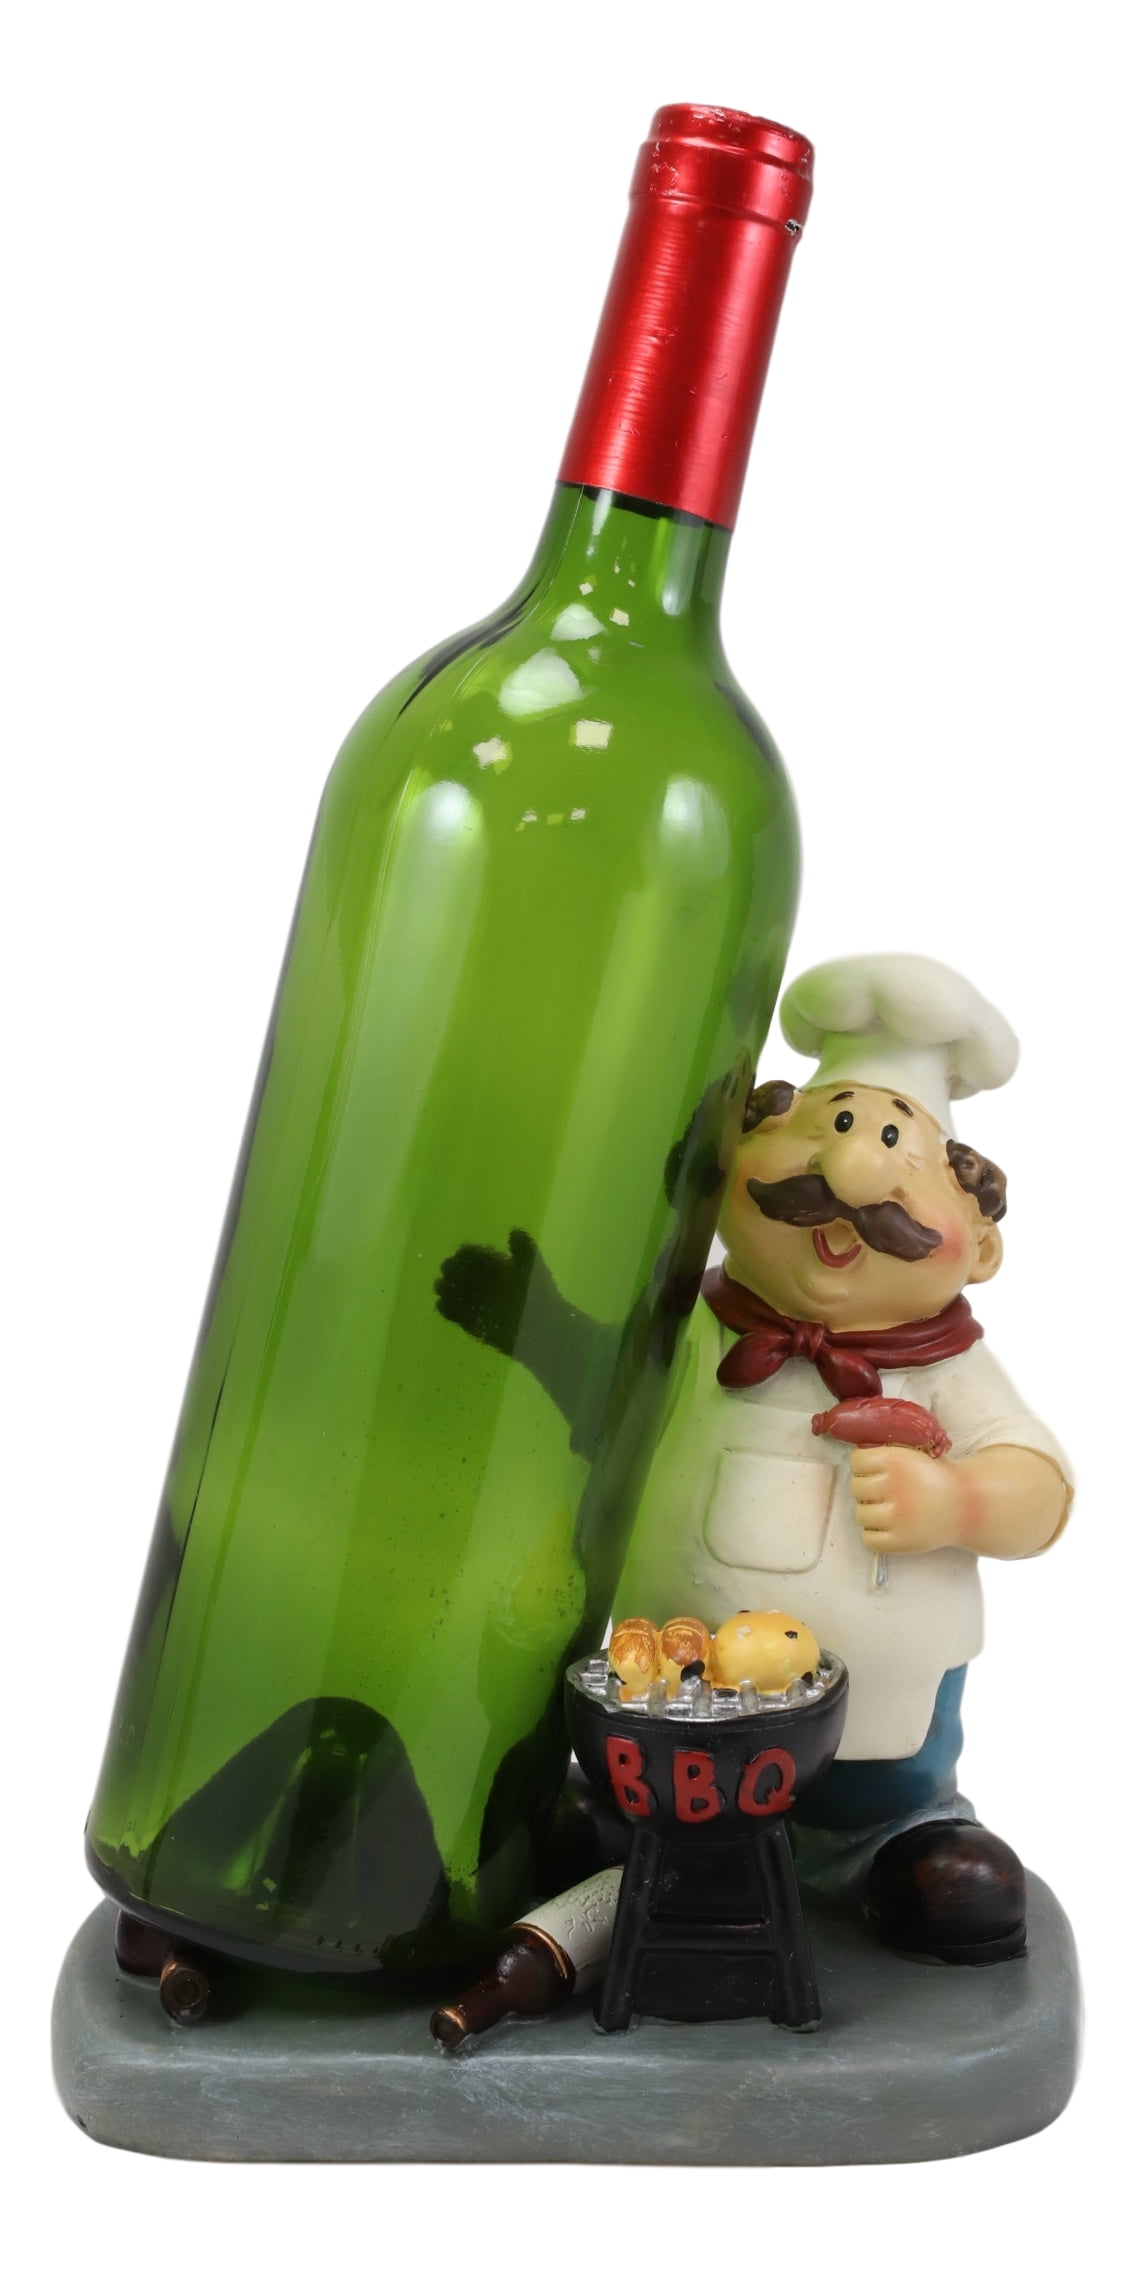 Decorative Kitchen Polyresin Laurel & Hardy Chefs With Grape Vines And Apples In A Basket Wine Bottle Holder 